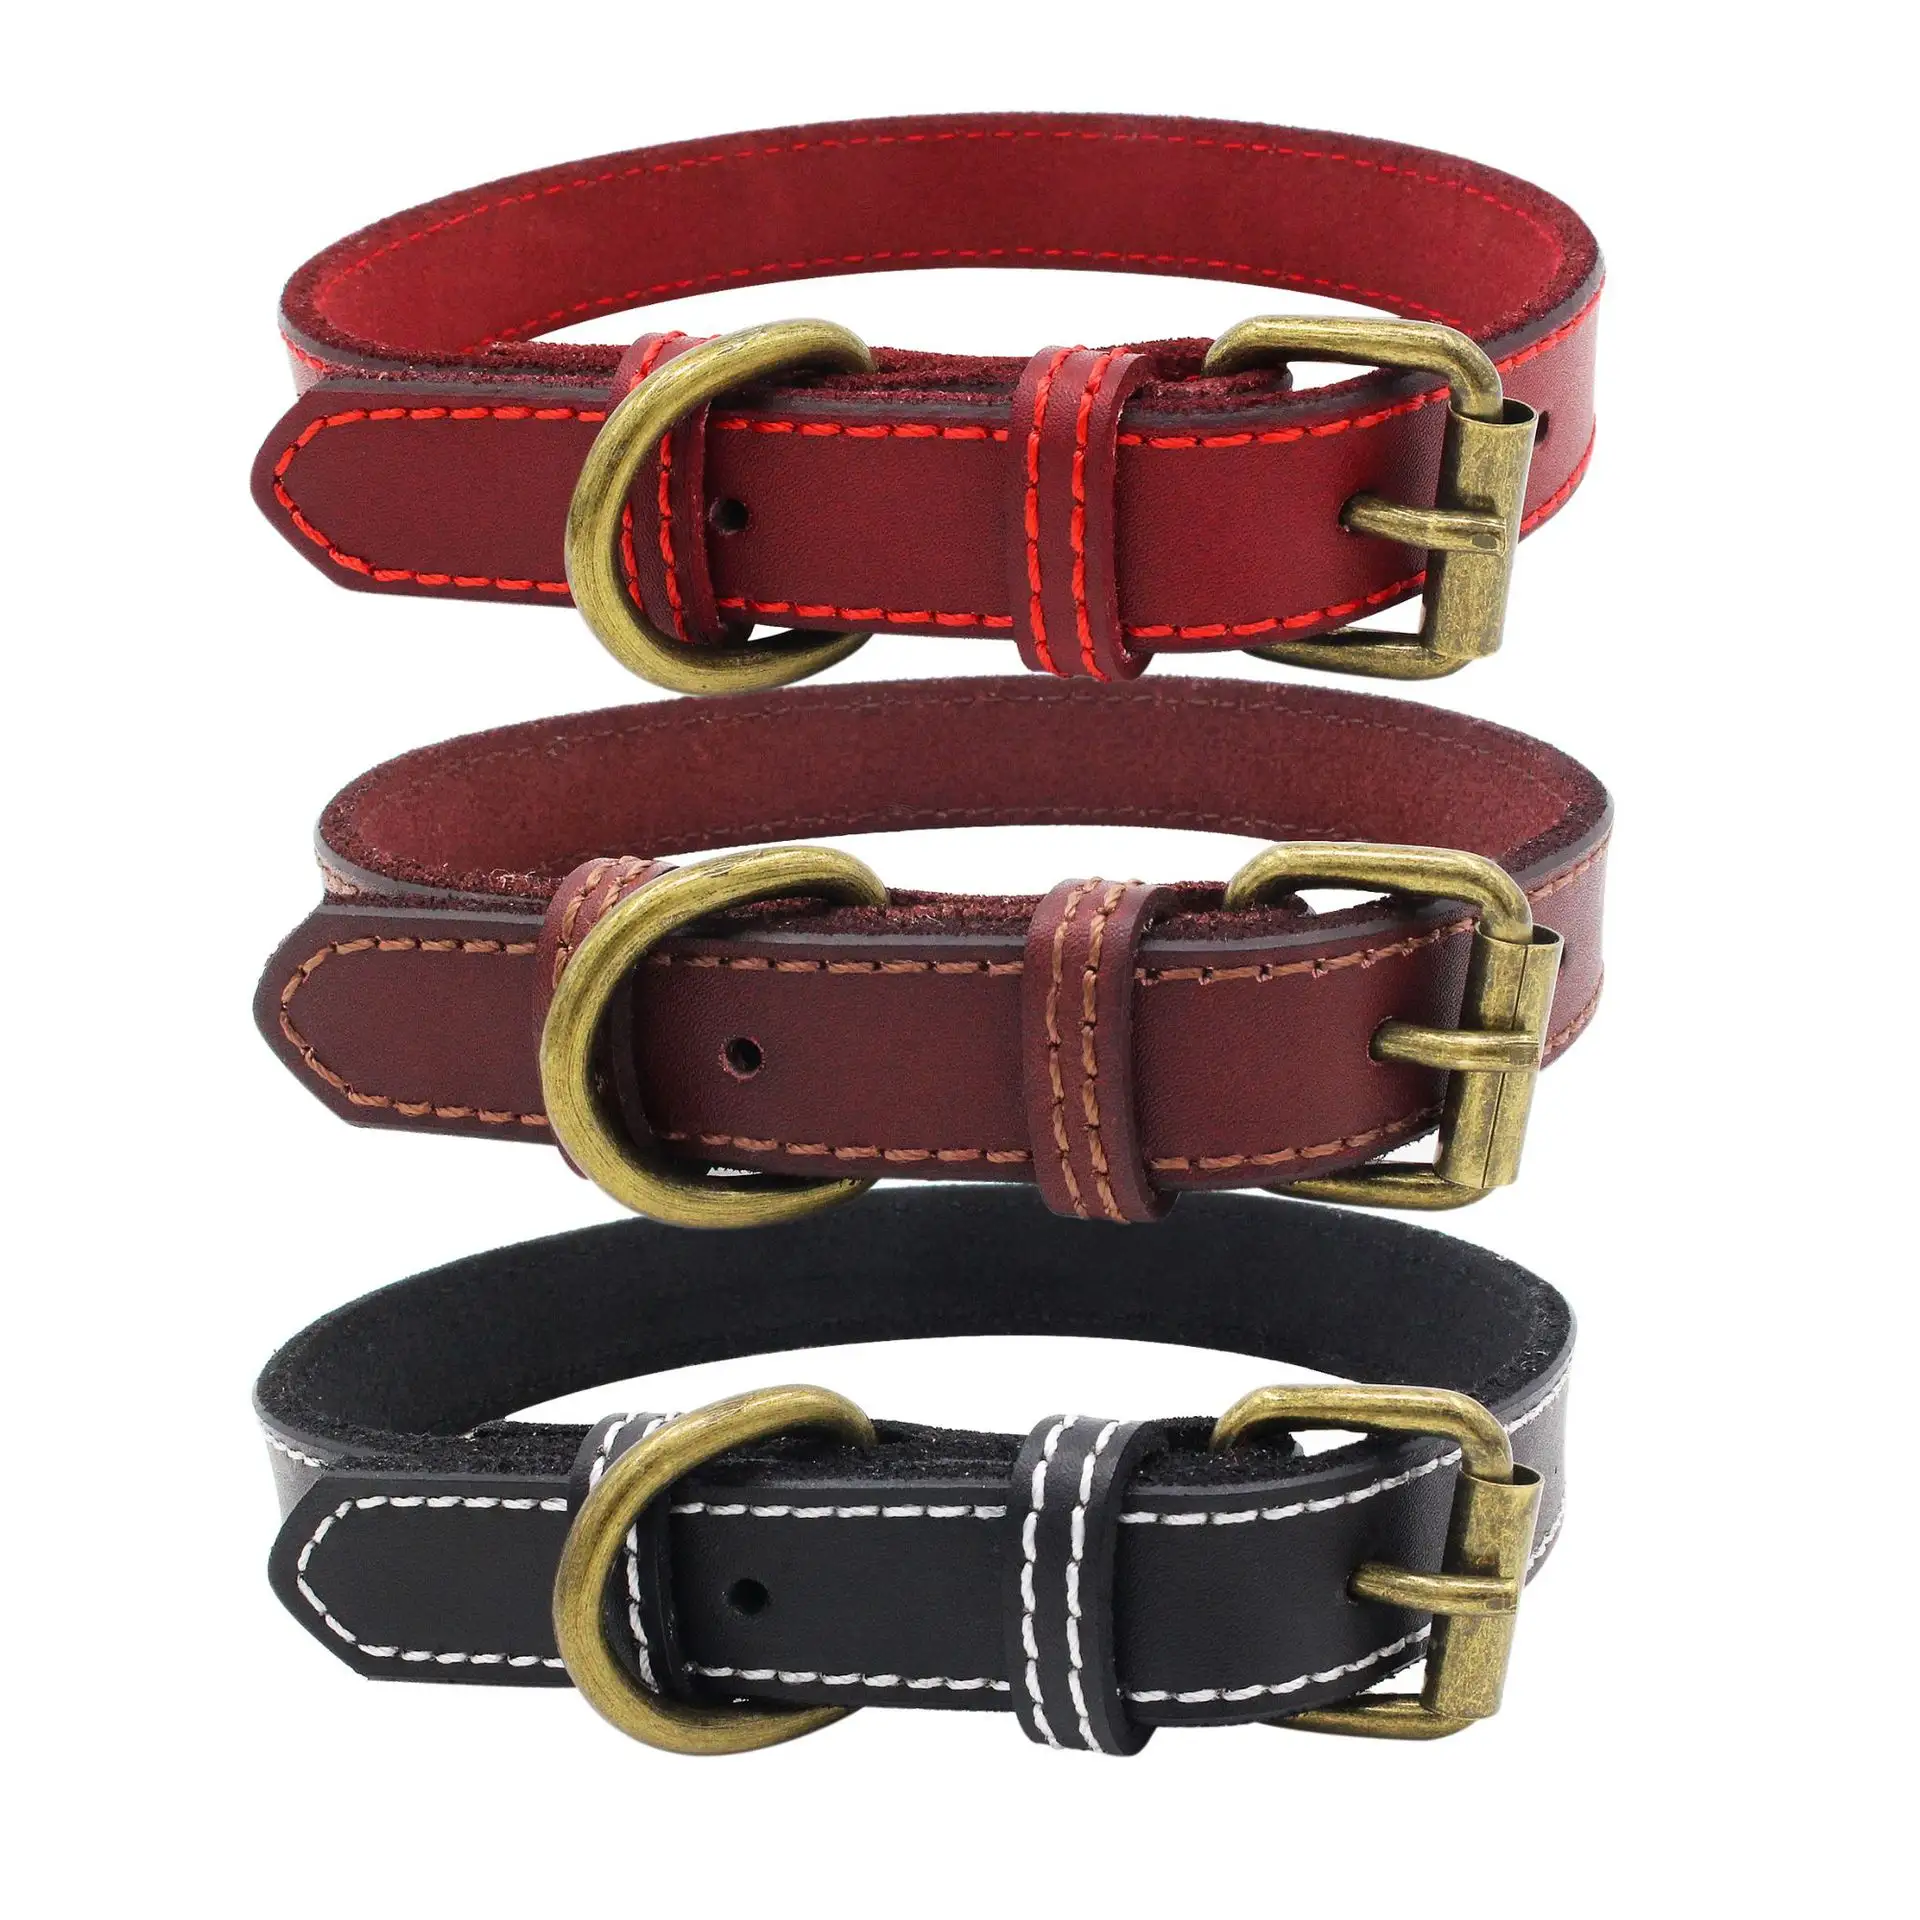 New Pure Cowhide Pet Training Collar Vintage Rivet Collar Dog Neck Set Two Layer Cowhide Dog Collar